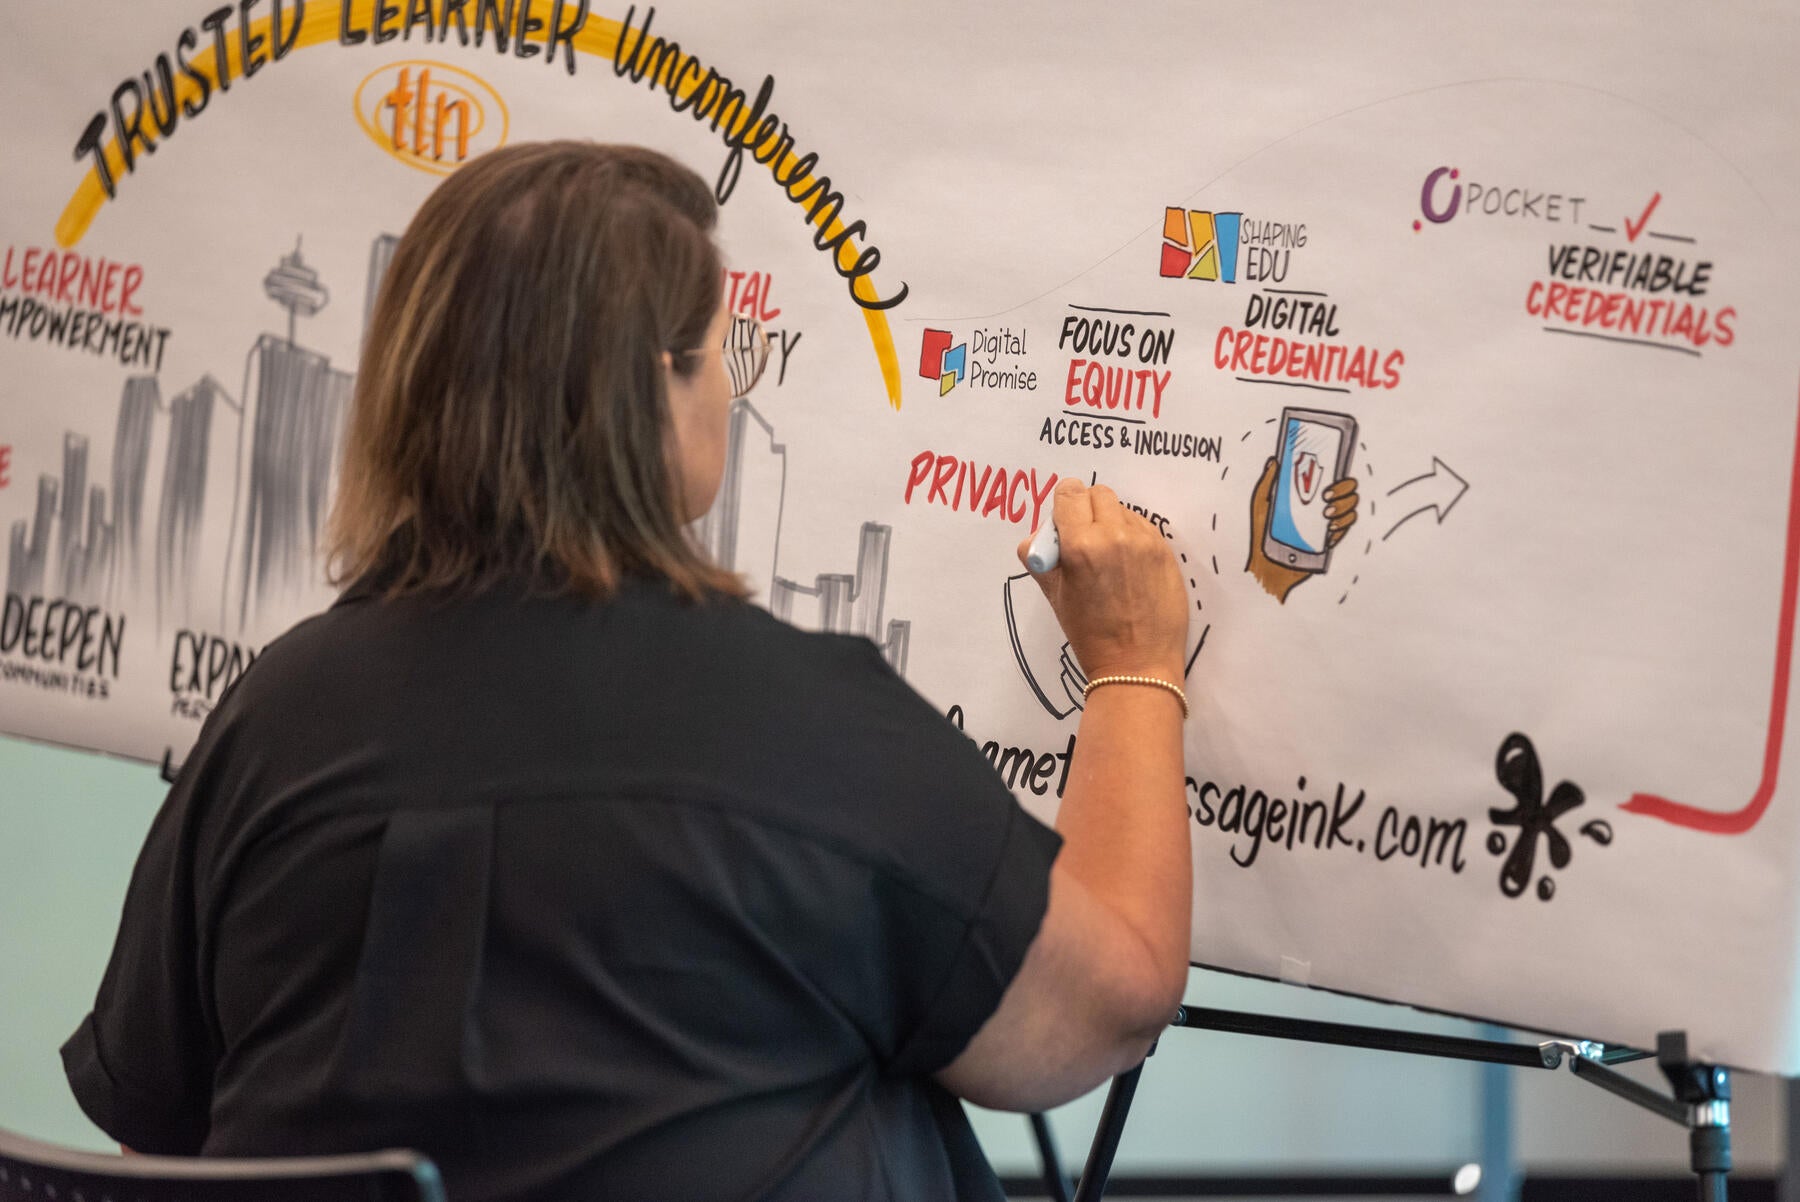 Graphic facilitator captures the discussions of the day